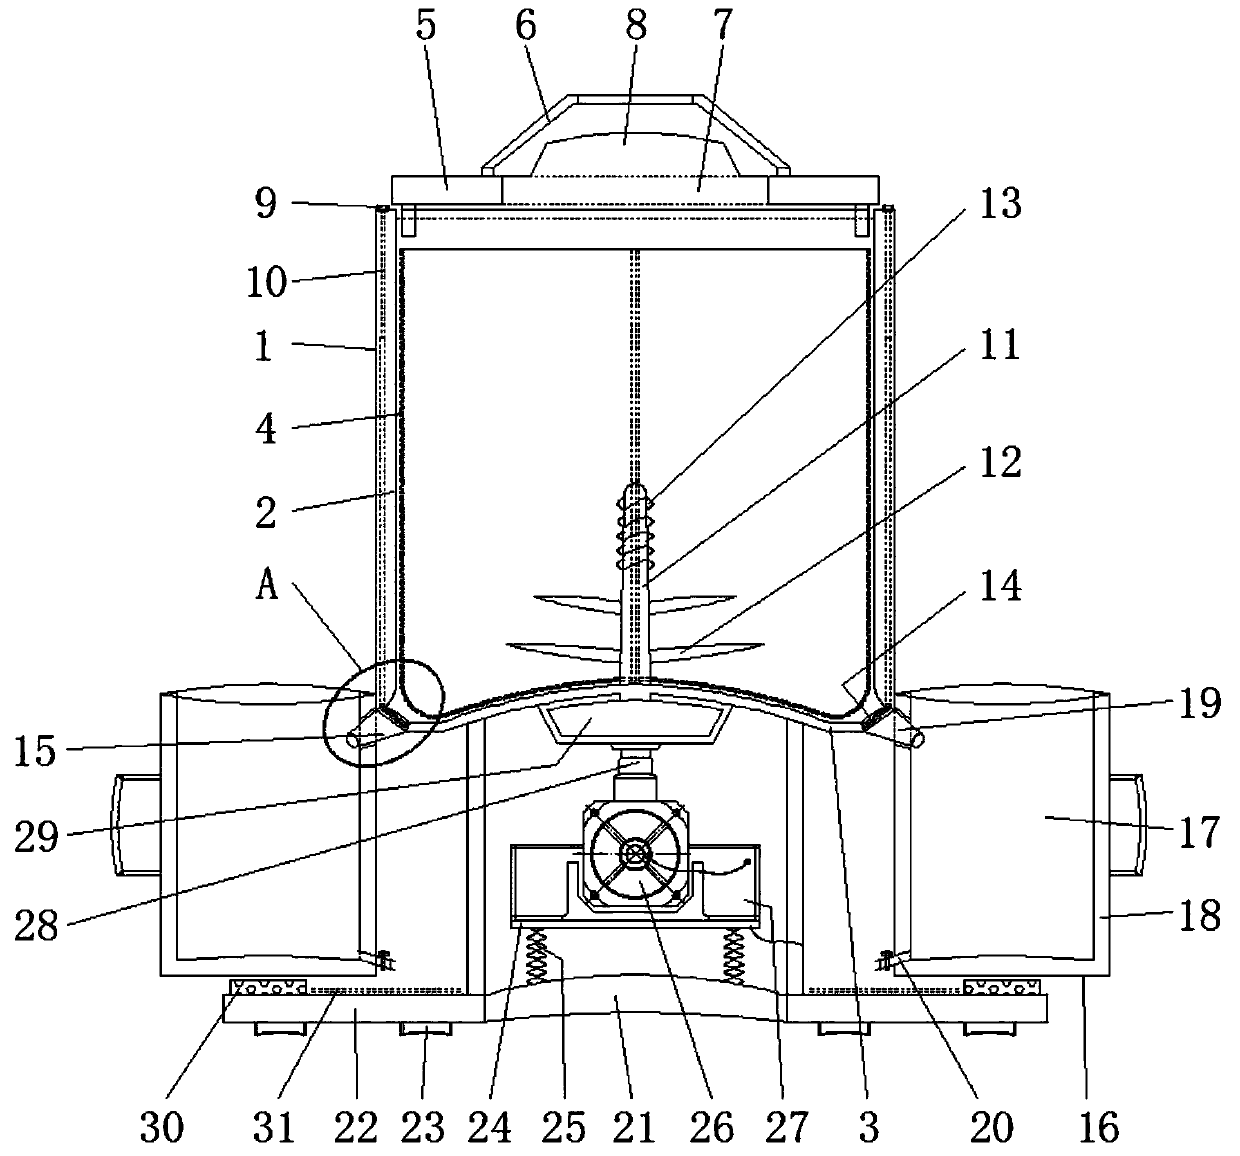 Working method of a portable juice extractor for household use